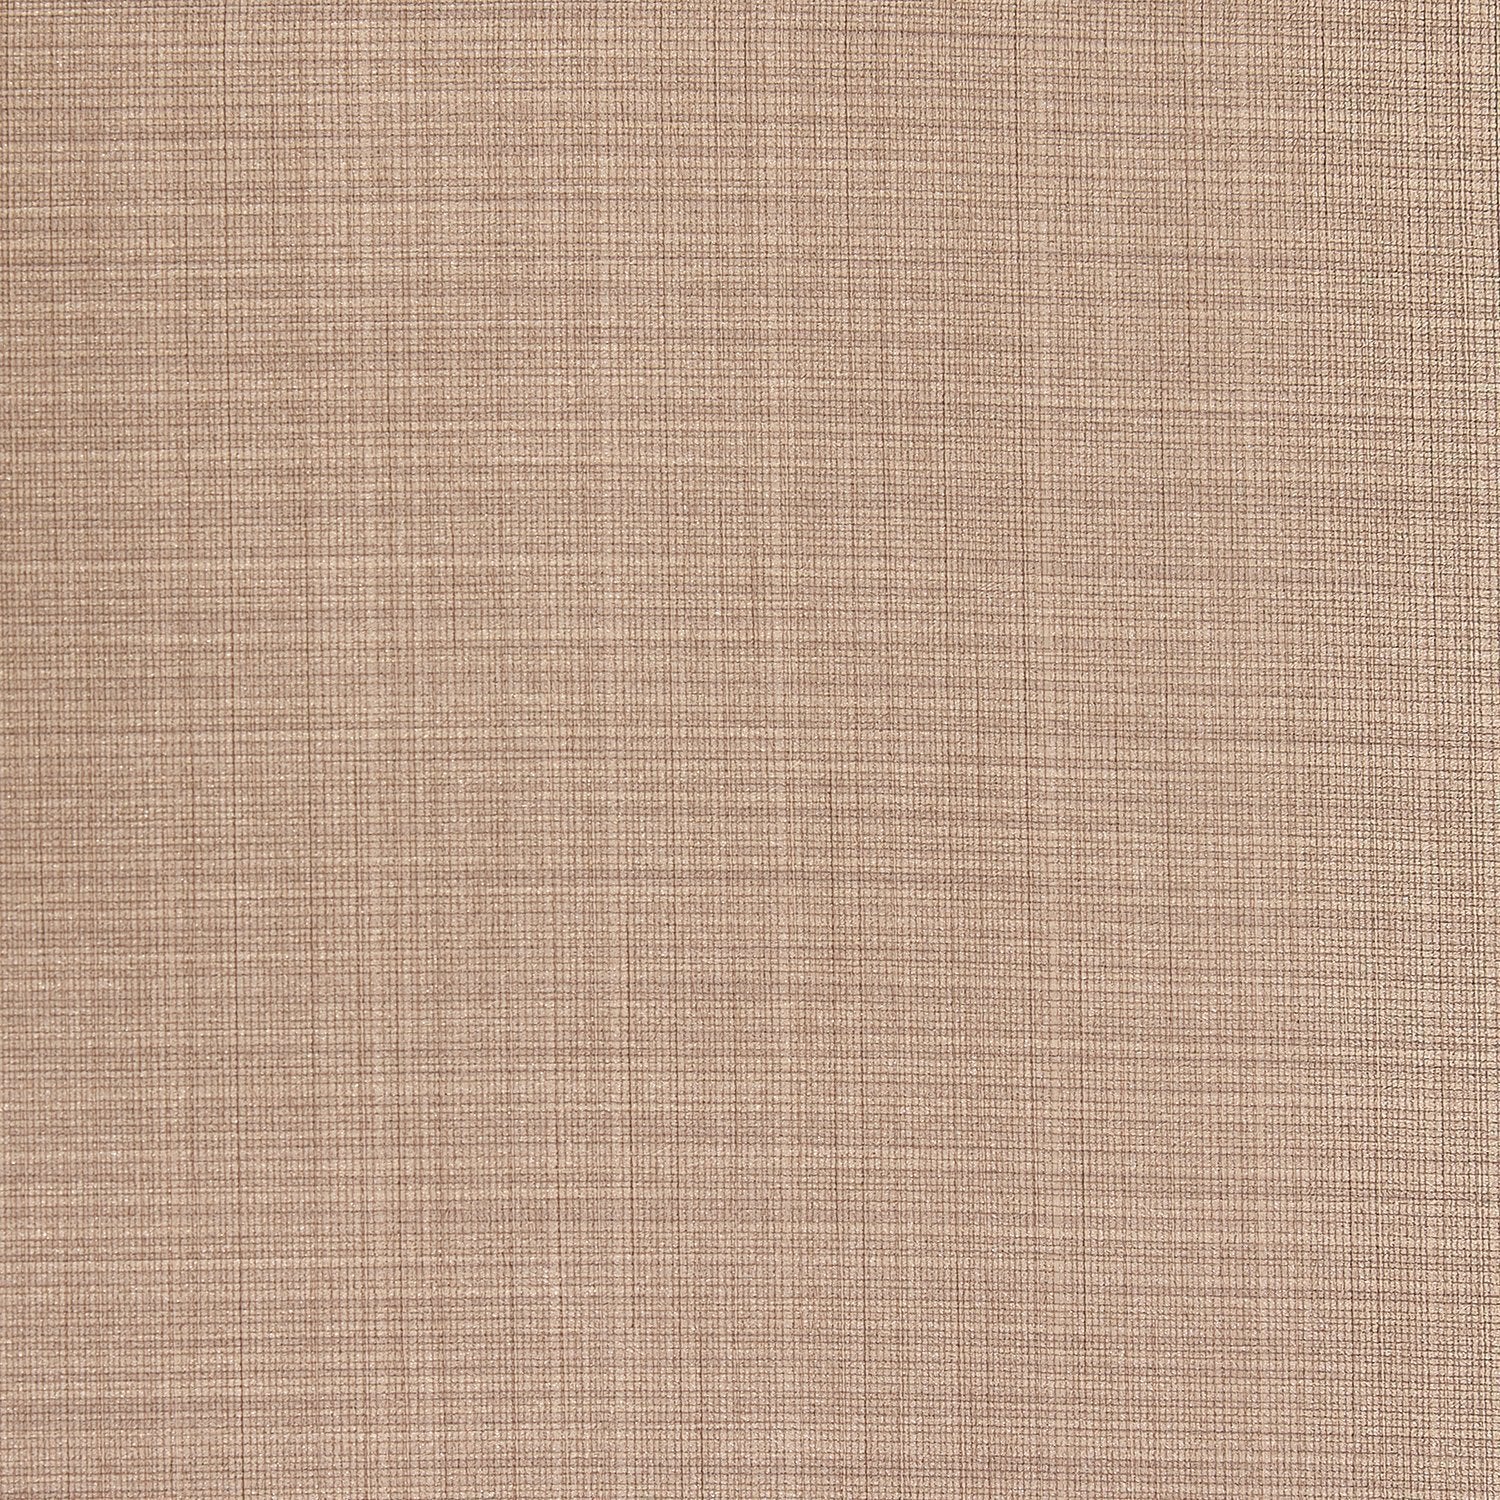 Angles Silk - Y47598 - Wallcovering - Vycon - Kube Contract